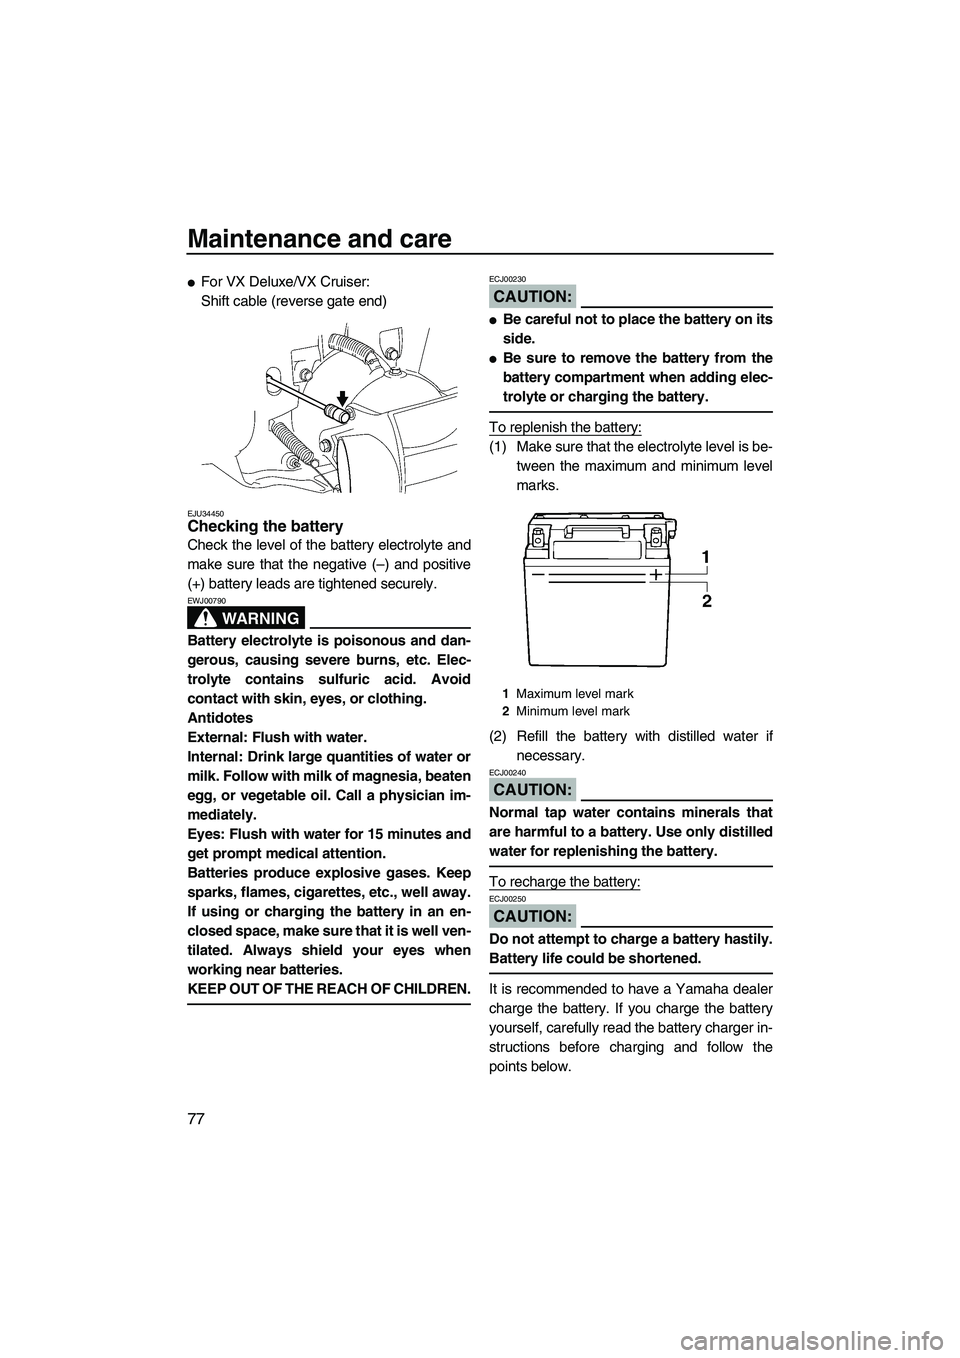 YAMAHA VX SPORT 2007  Owners Manual Maintenance and care
77
For VX Deluxe/VX Cruiser:
Shift cable (reverse gate end)
EJU34450Checking the battery 
Check the level of the battery electrolyte and
make sure that the negative (–) and pos